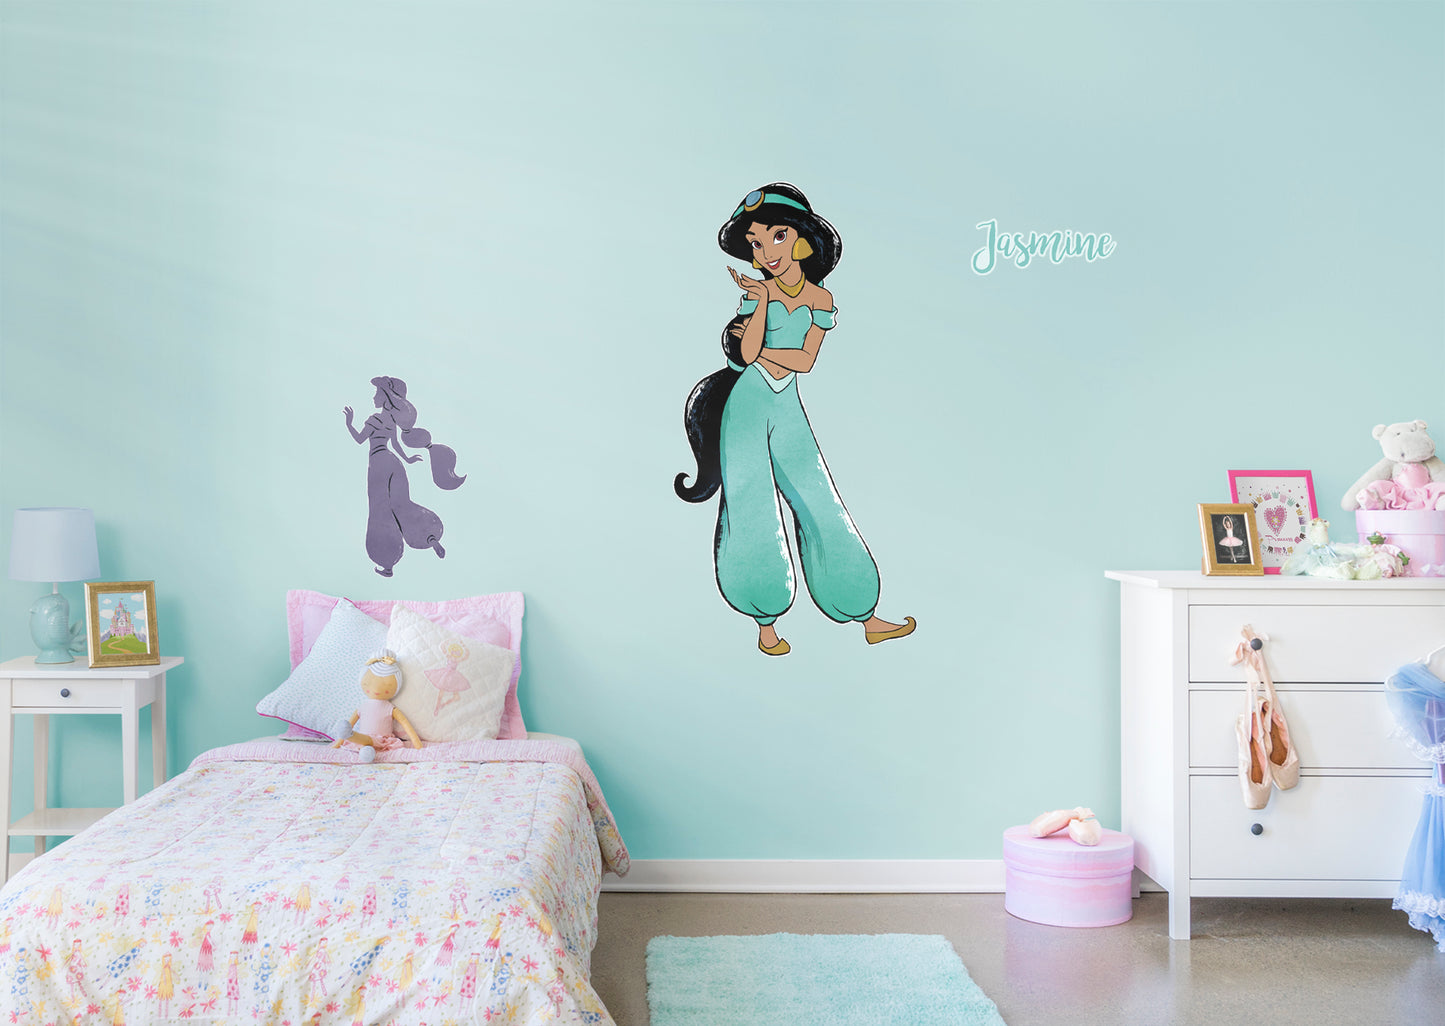 Aladdin: Jasmine Modern Storybook        - Officially Licensed Disney Removable Wall   Adhesive Decal